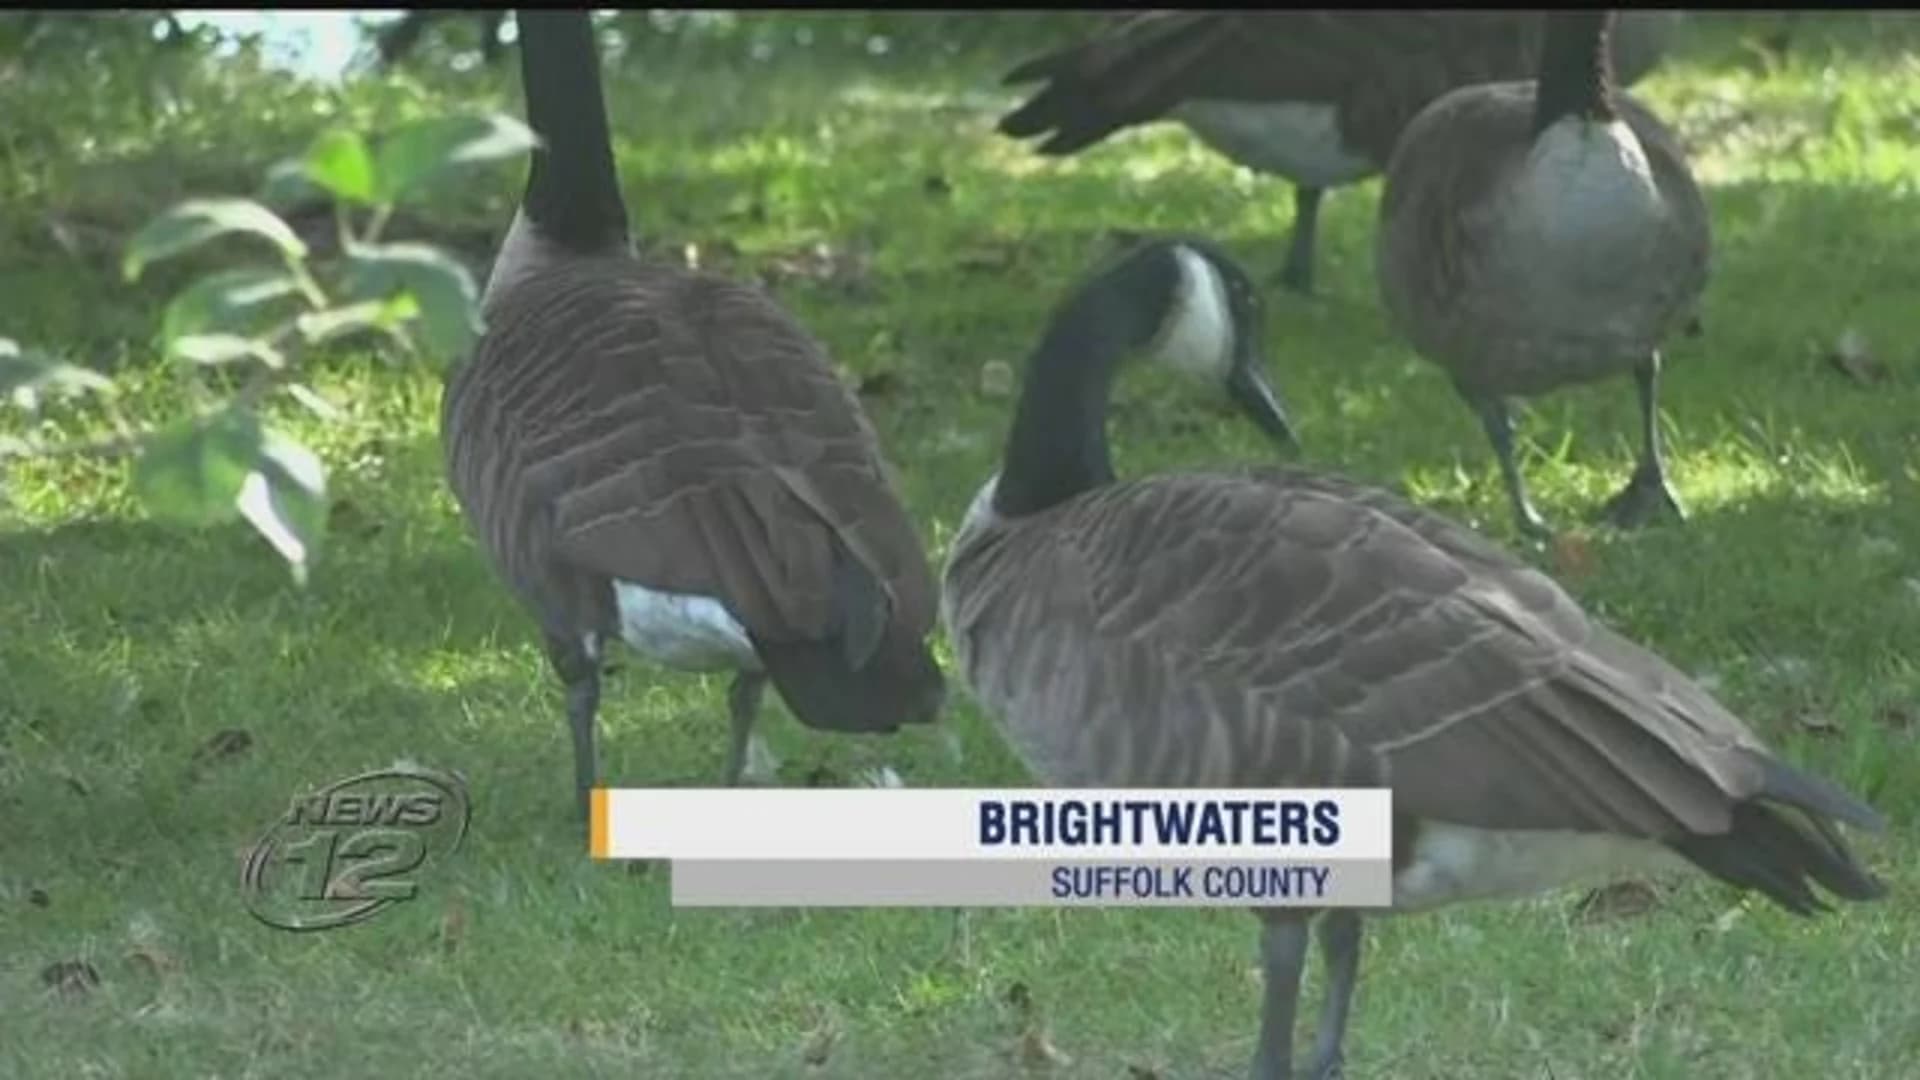 Brightwaters residents seek solution to excessive geese population